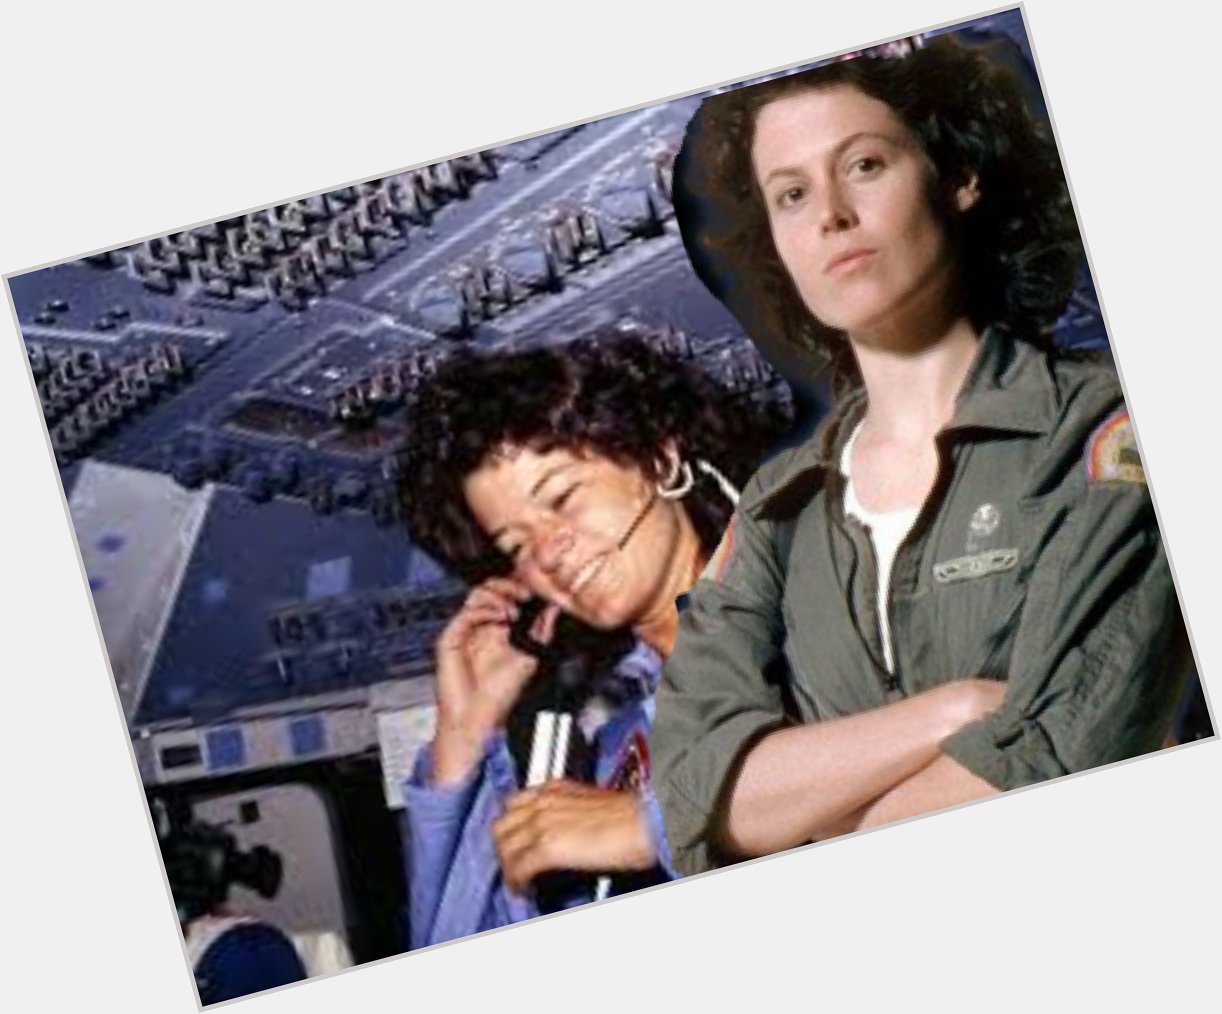 Happy Birthday Sally Ride. I think Hollywood missed a step by not doing a movie starring Sigourney Weaver. 